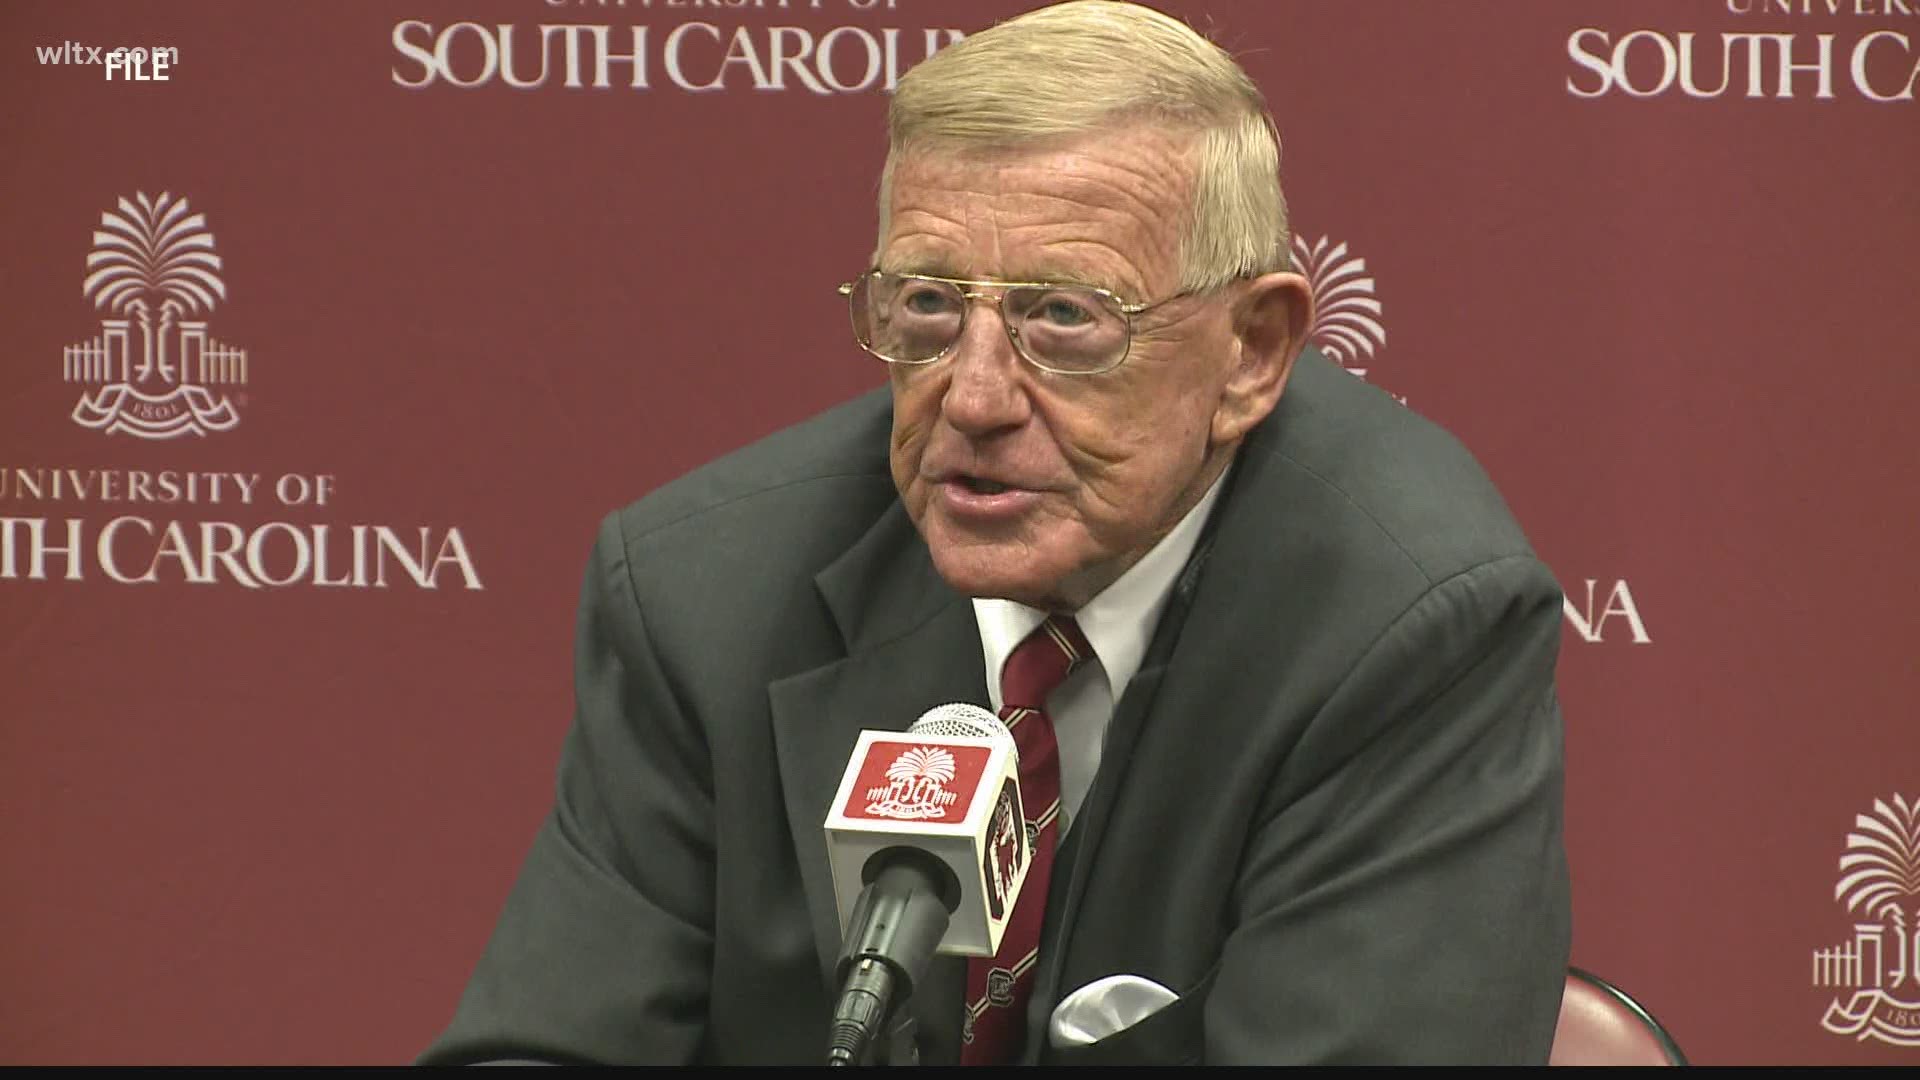 College Football Hall of Fame Coach Lou Holtz will be honored with the nation's highest civilian honor by President Donald Trump.